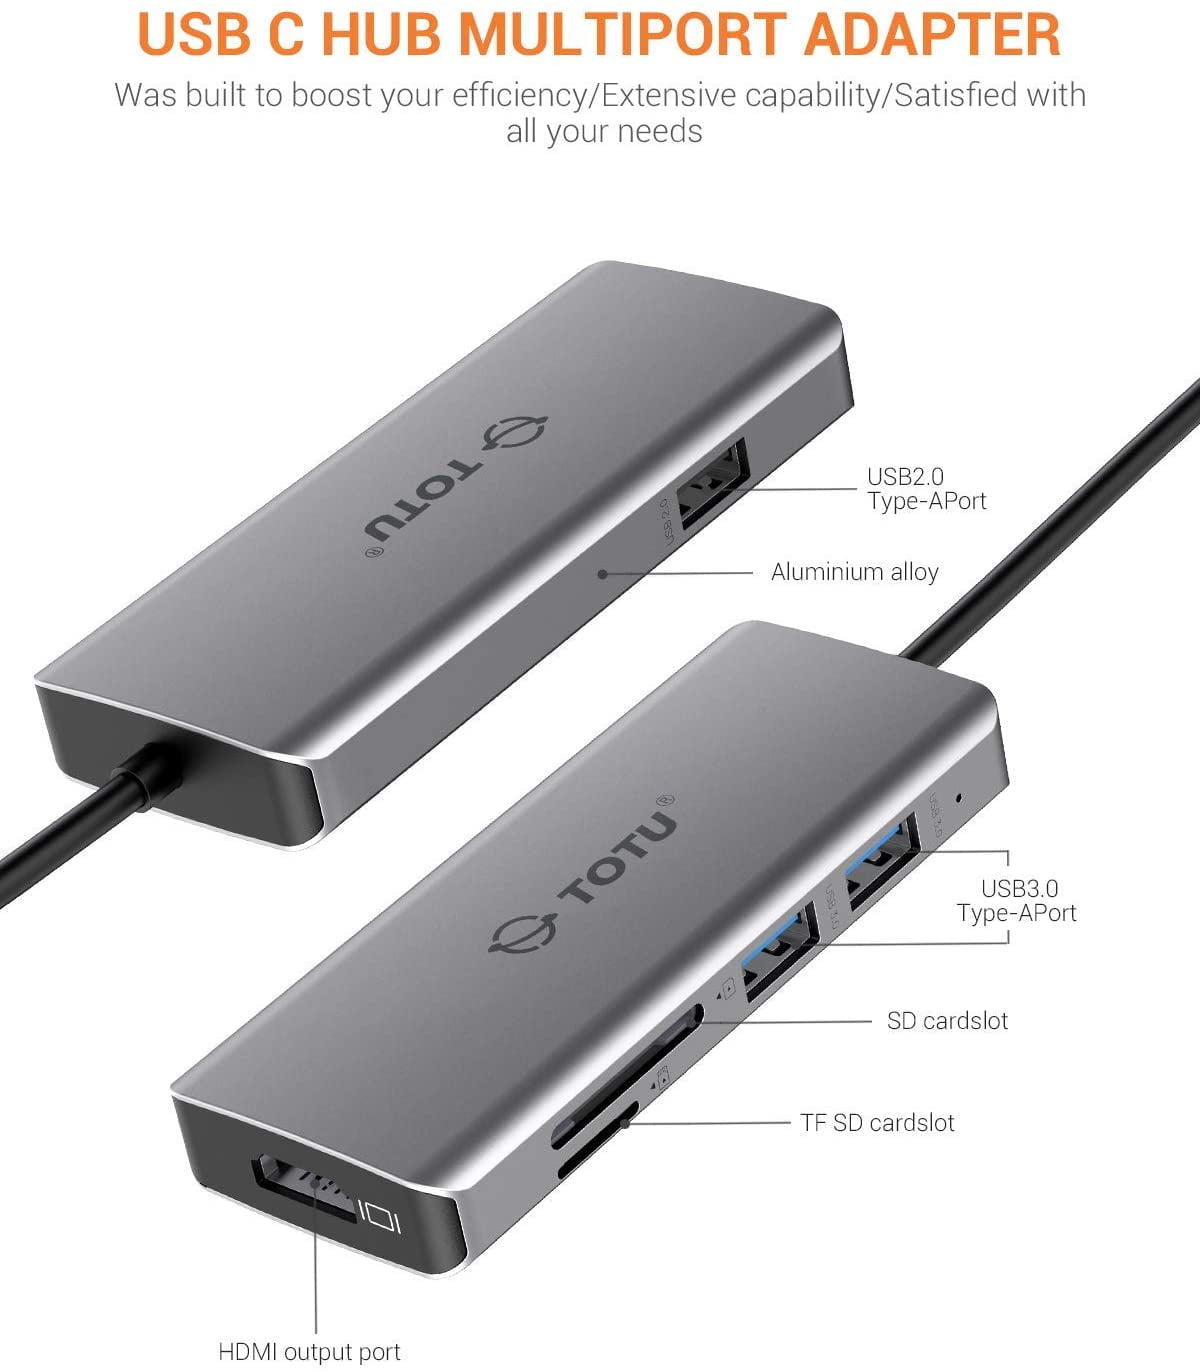 USB C Hub Gray TOTU 6-in-1 Type C Hub with 2 USB 3.0 Port,1 USB 2.0 Port,4K HDMI,SD/TF Card Port,Compatible for MacBook/Pro/Air 2016/2017/2018 and More USB C Devices 